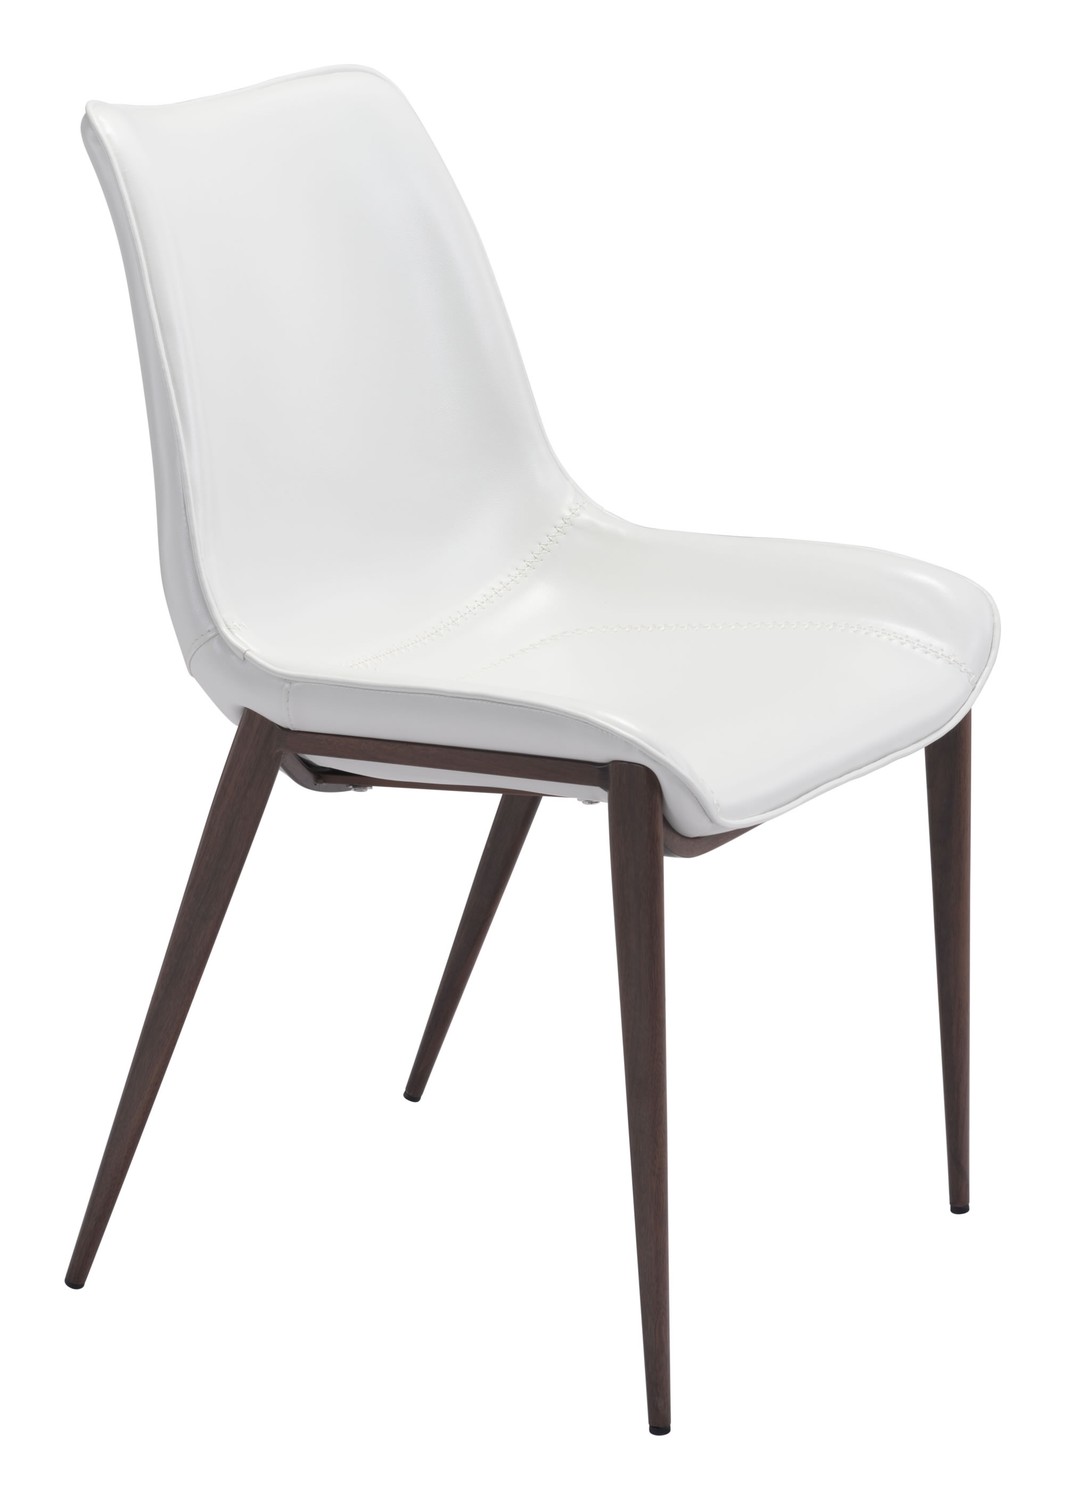 21.3" x 23.6" x 35.4" White & Walnut, Leatherette, Brushed Stainless Steel, Dining Chair - Set of 2